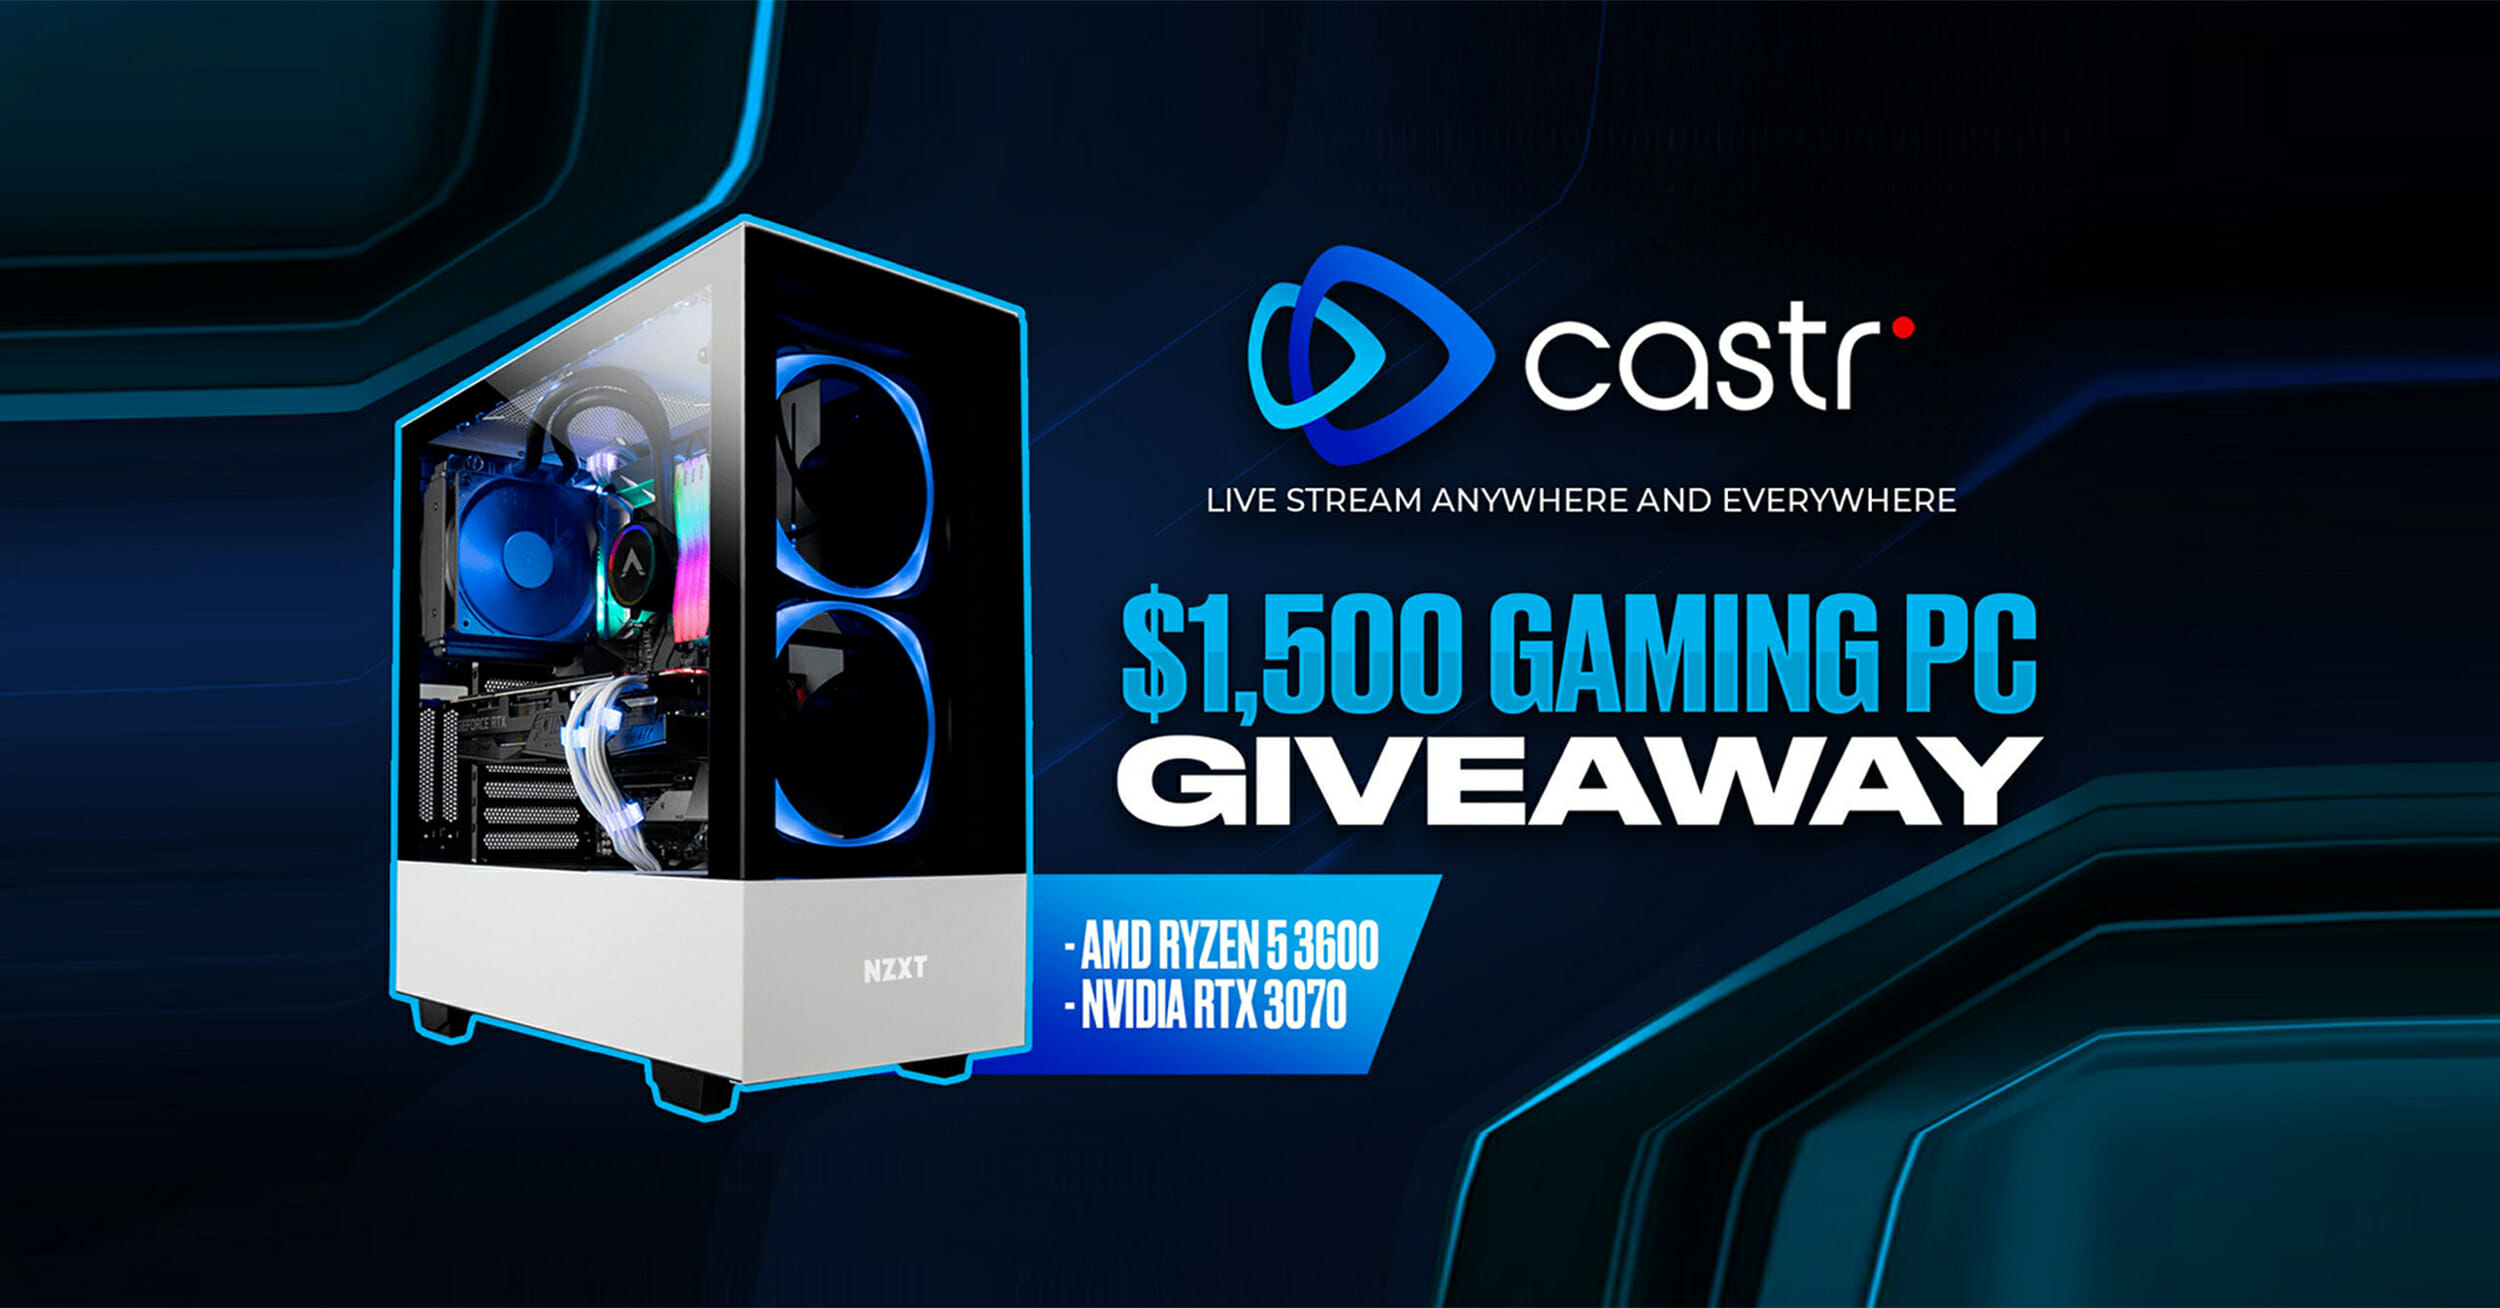 Castr 2021 New Year Giveaway